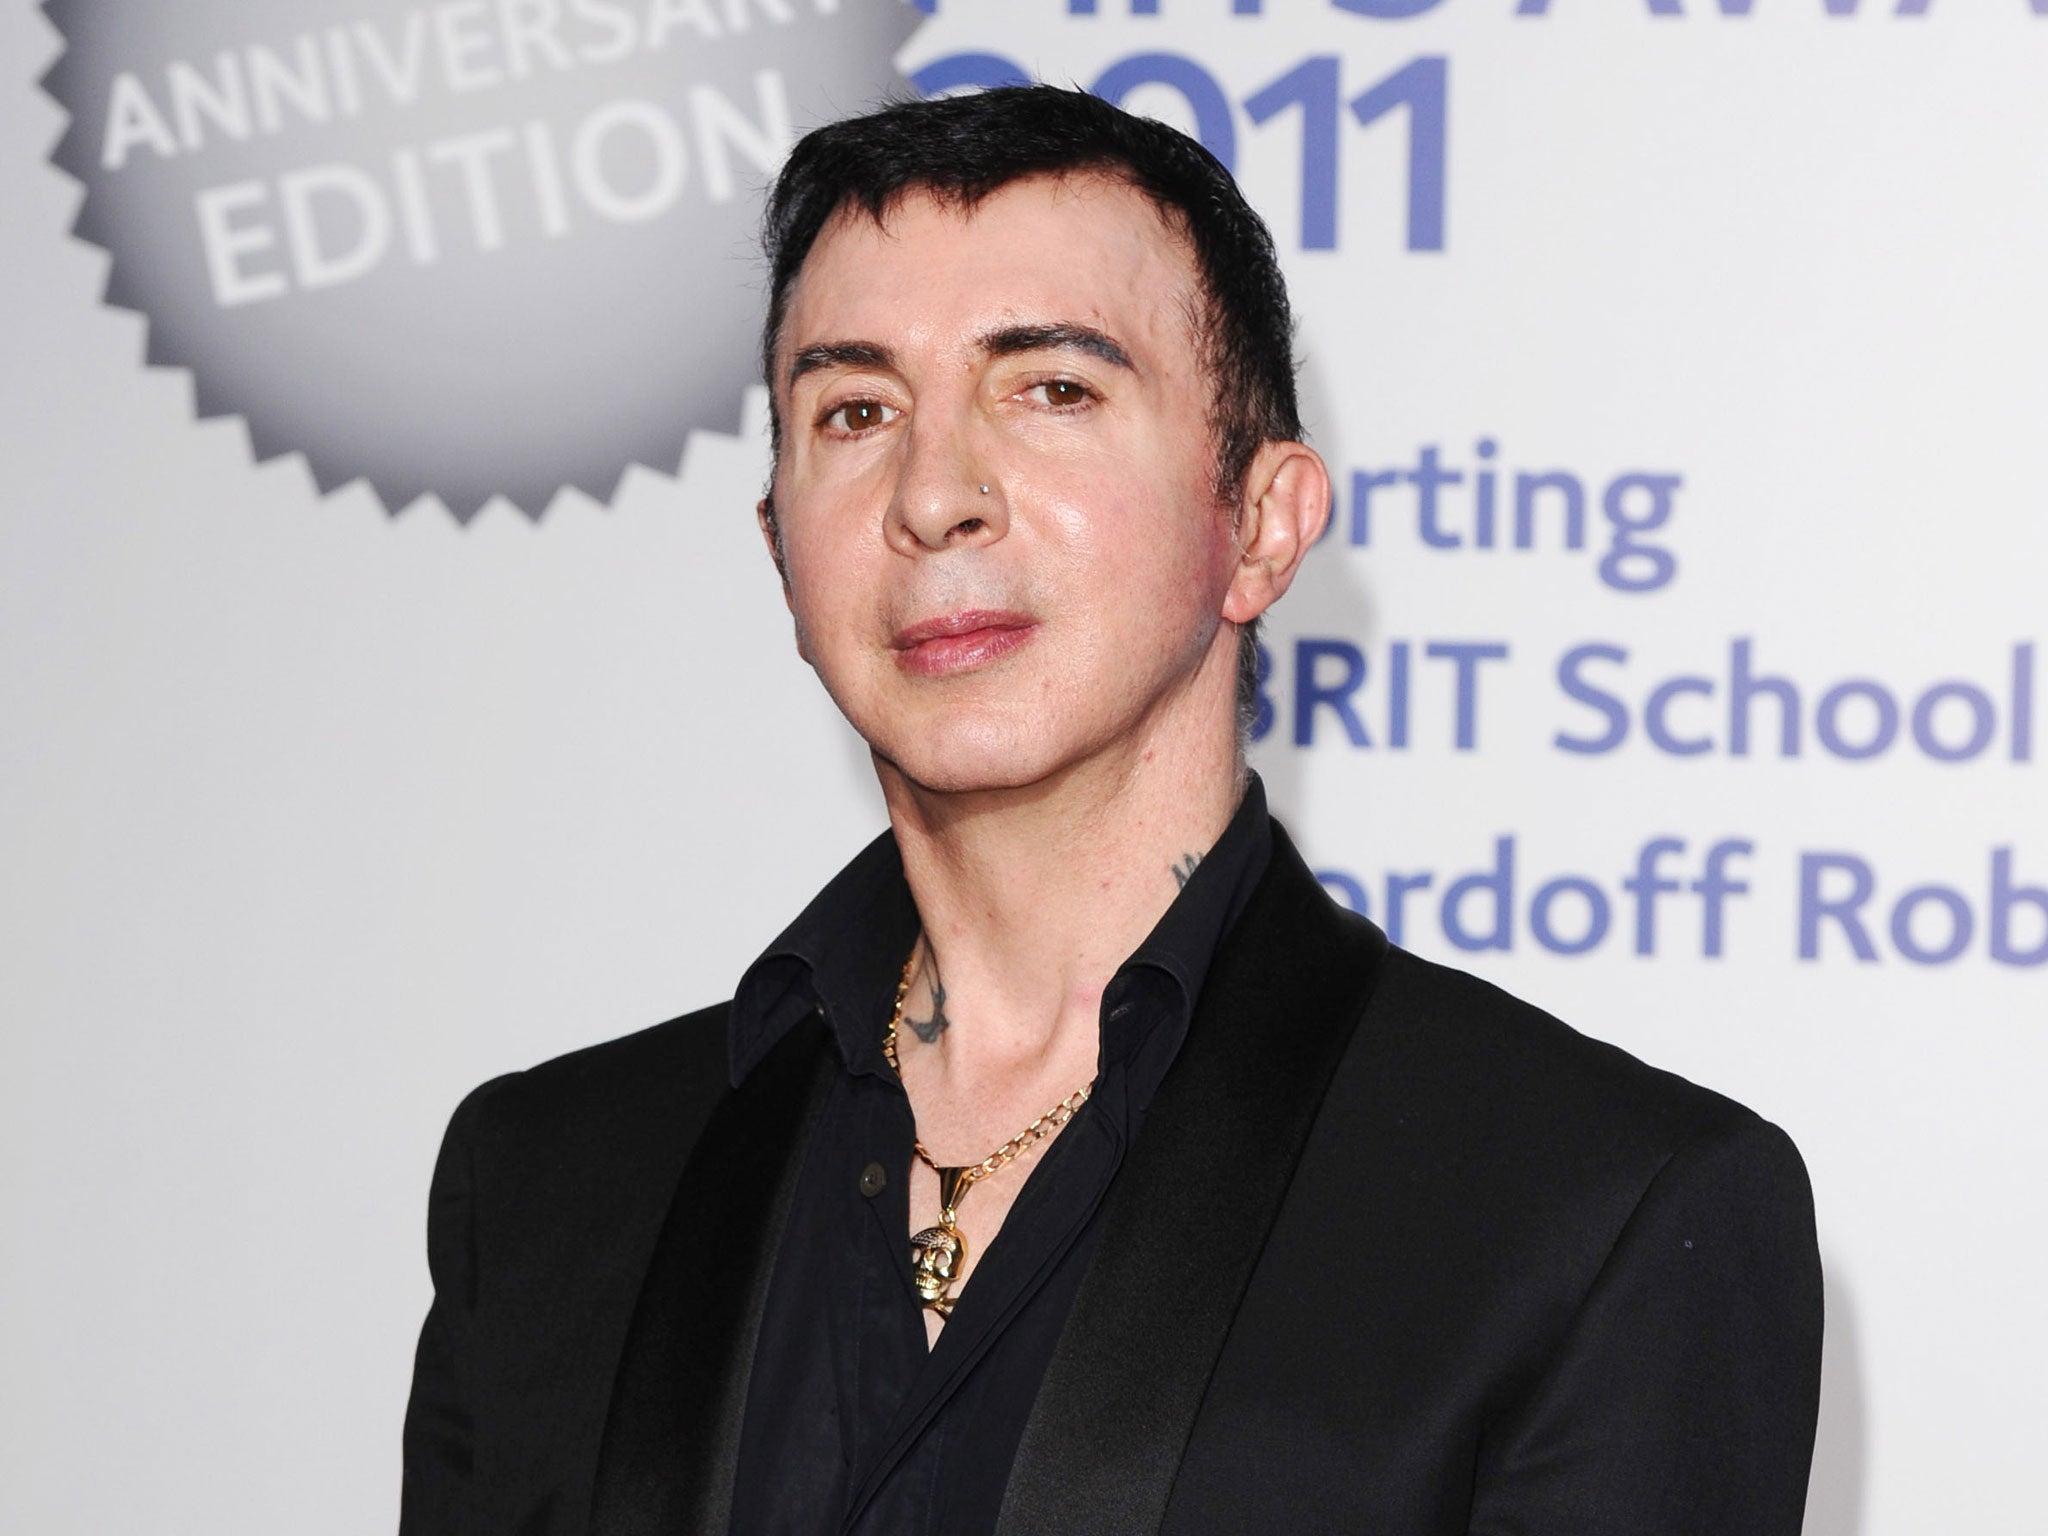 Marc Almond has long been intrigued by Russian culture, in particular its music